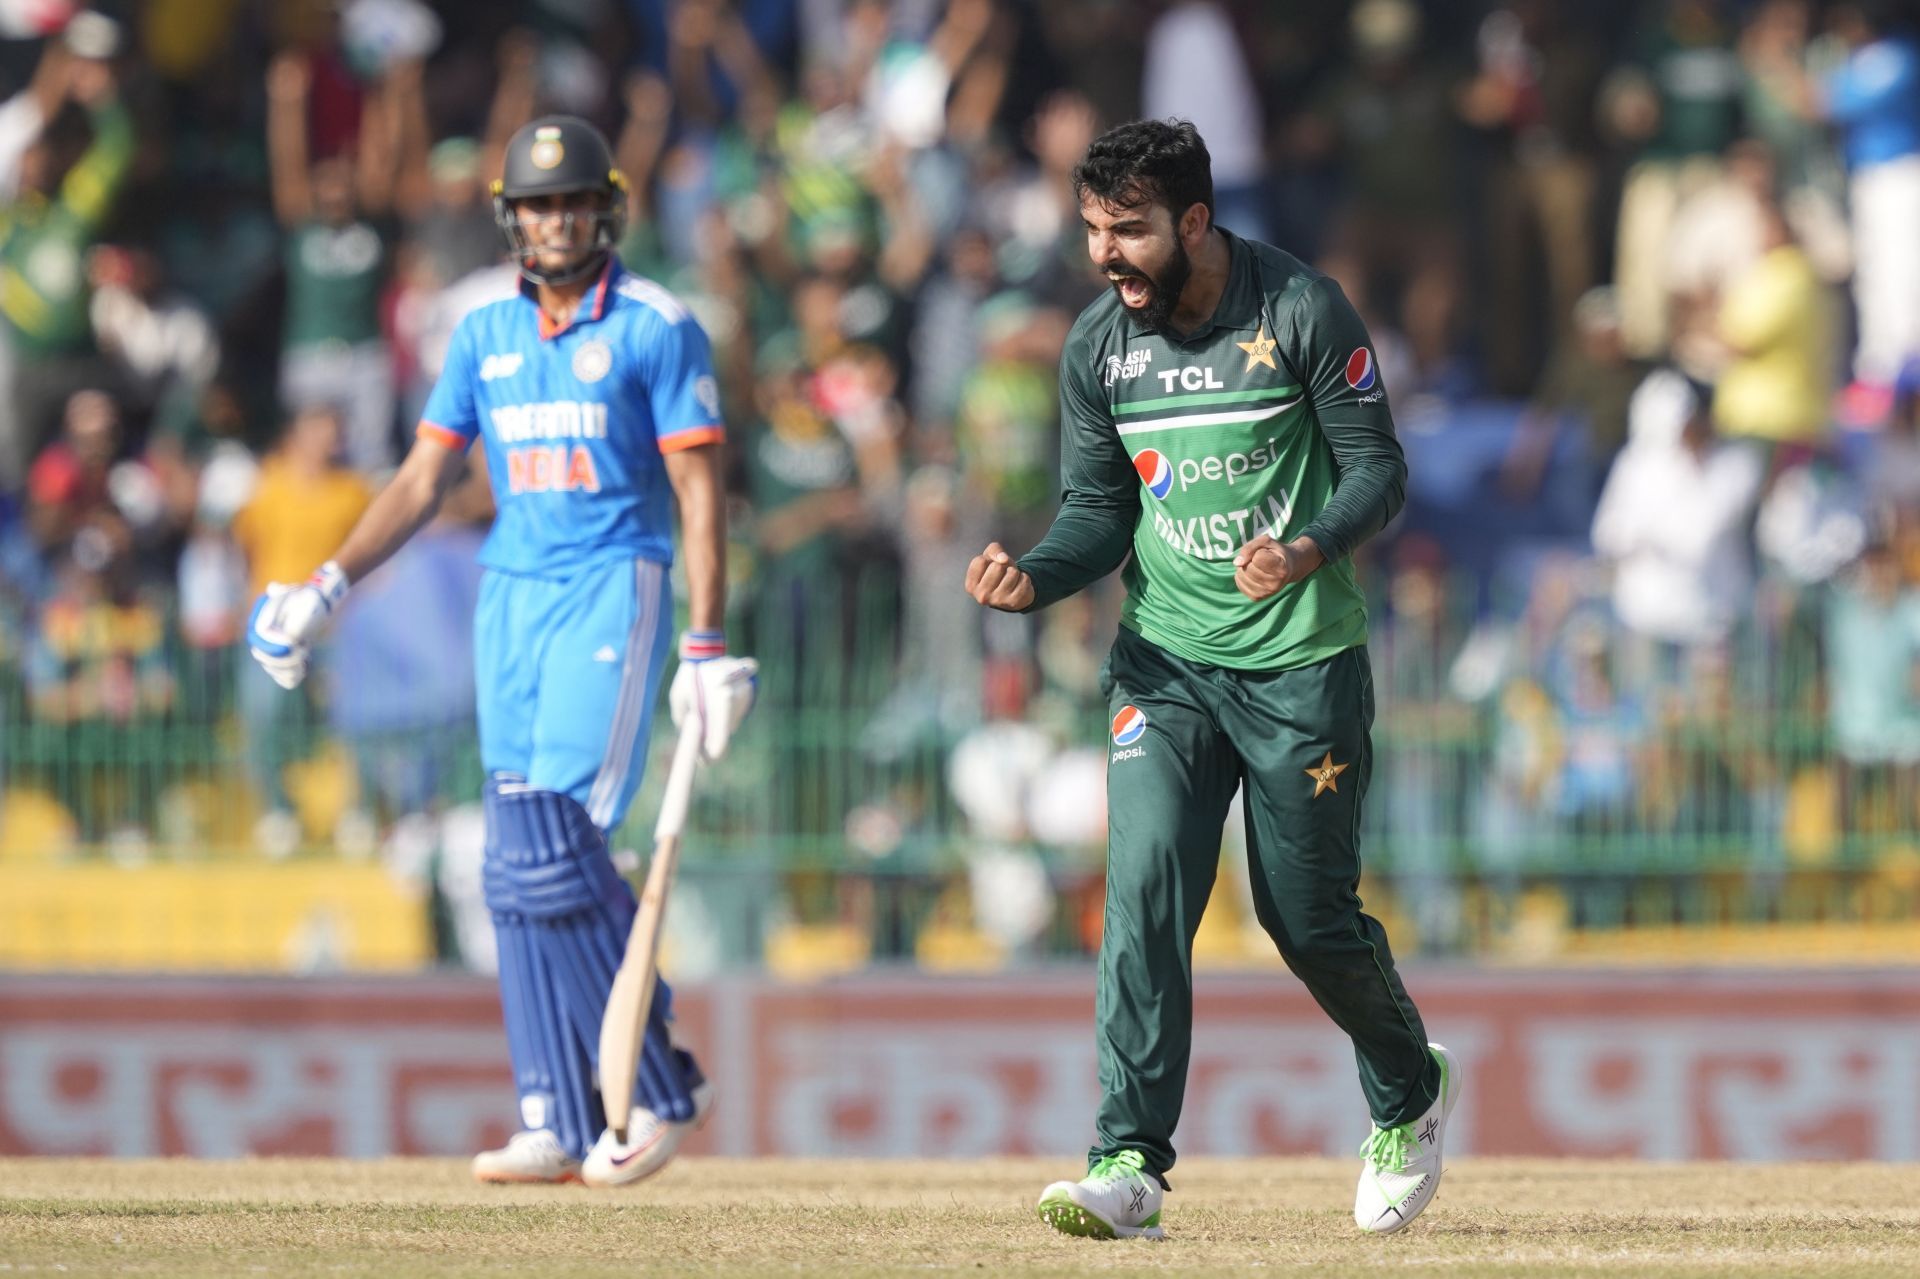 Shadab Khan broke the opening stand, having Rohit Sharma caught by Faheem Ashraf as the Indian captain attempted another big hit. Rohit&rsquo;s knock featured six fours and four sixes. (Pic: AP Photo/Eranga Jayawardena)